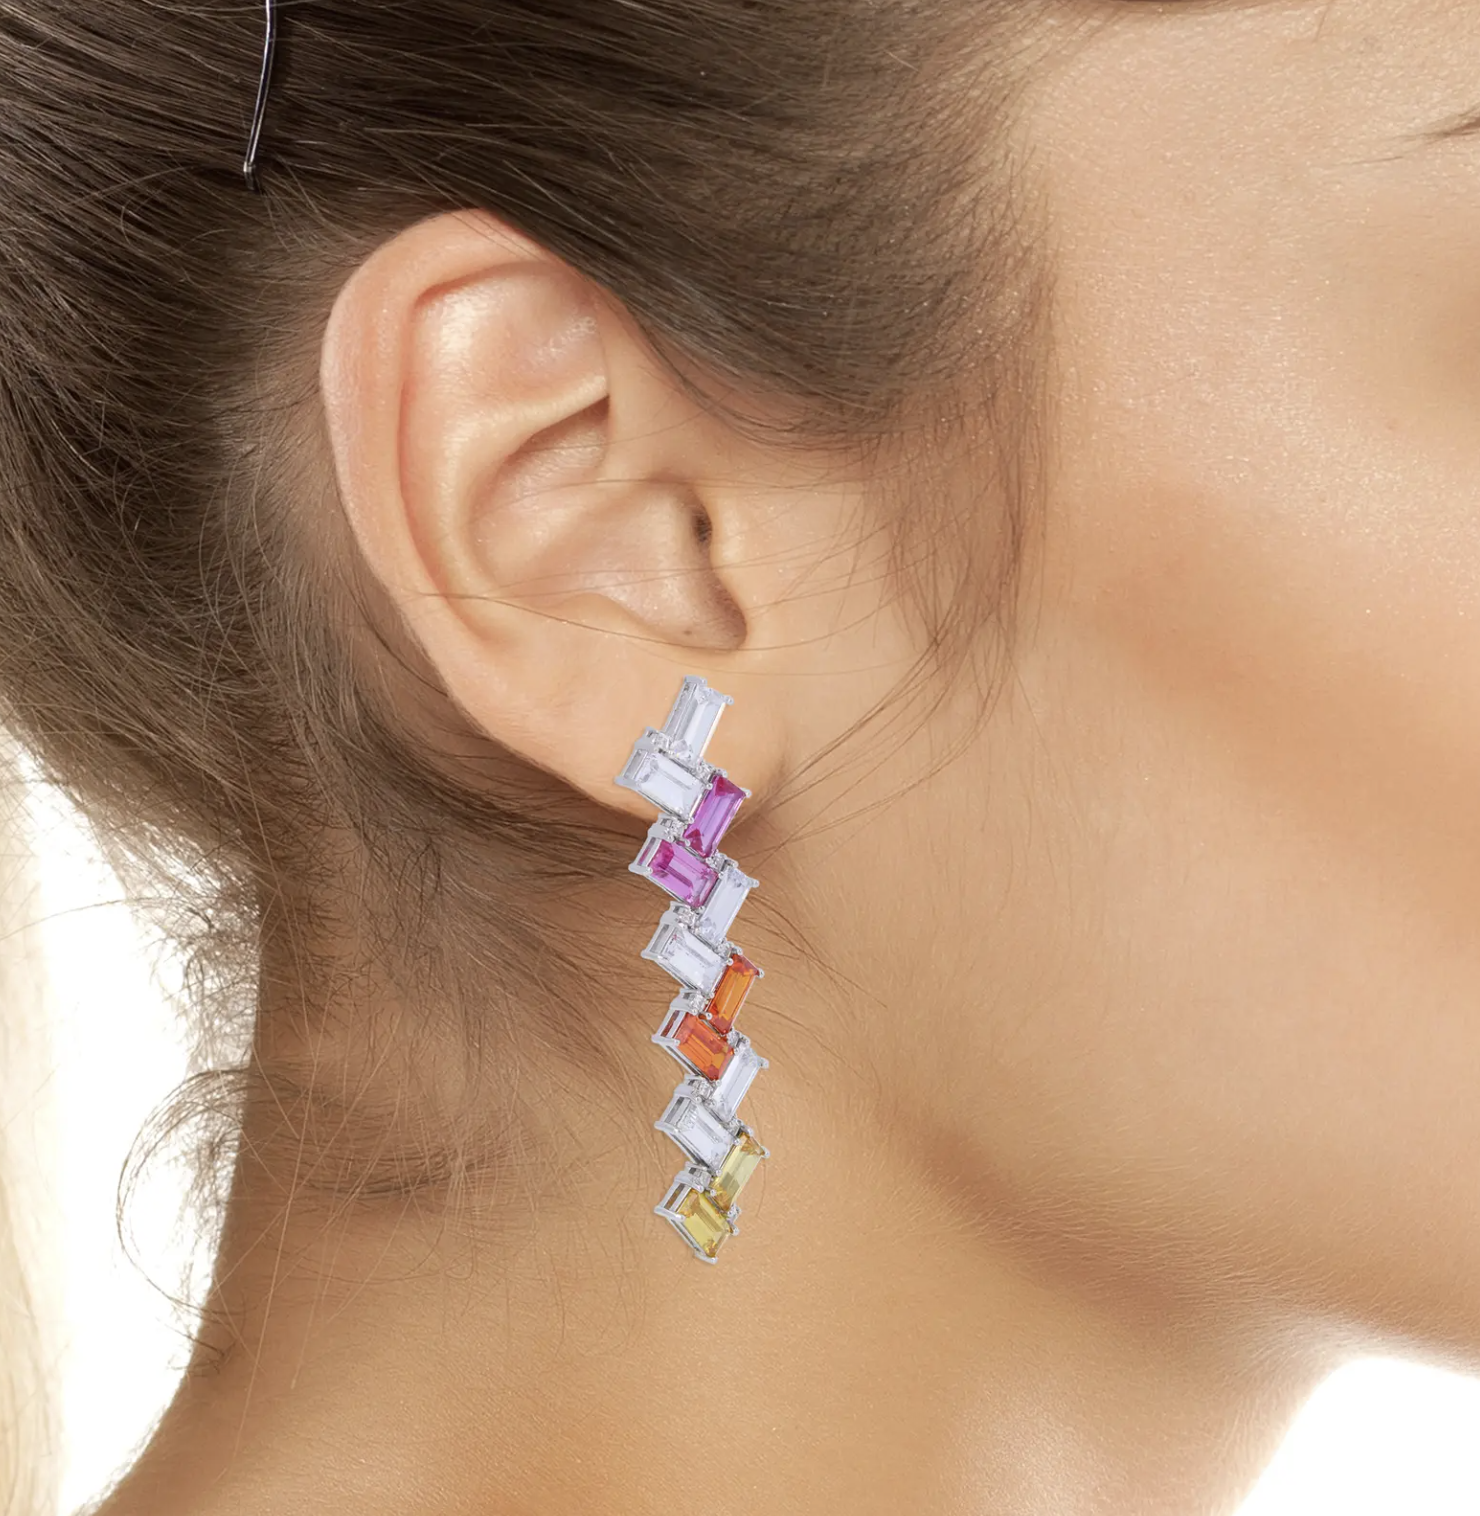 A person wearing one of the dangly earrings